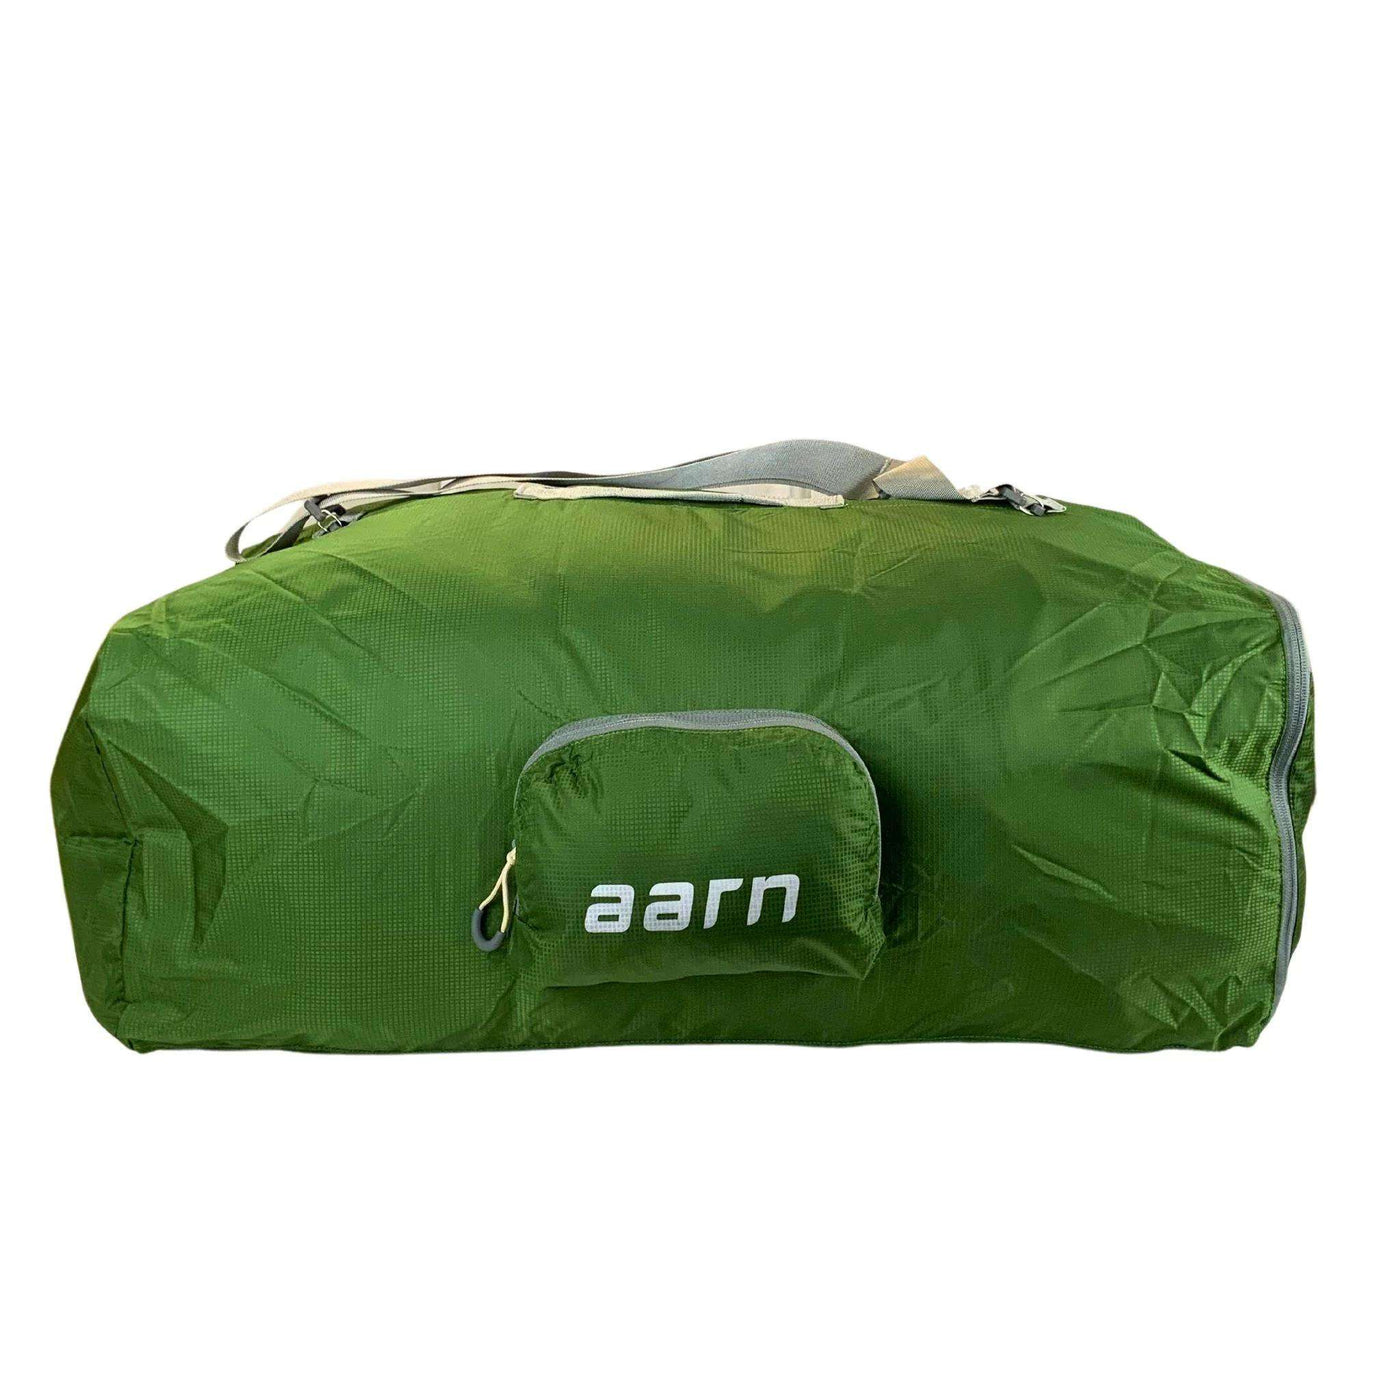 Aarn Pack Protector | NZ | Aarn Hiking Pack Accessories | Further Faster Christchurch NZ #green